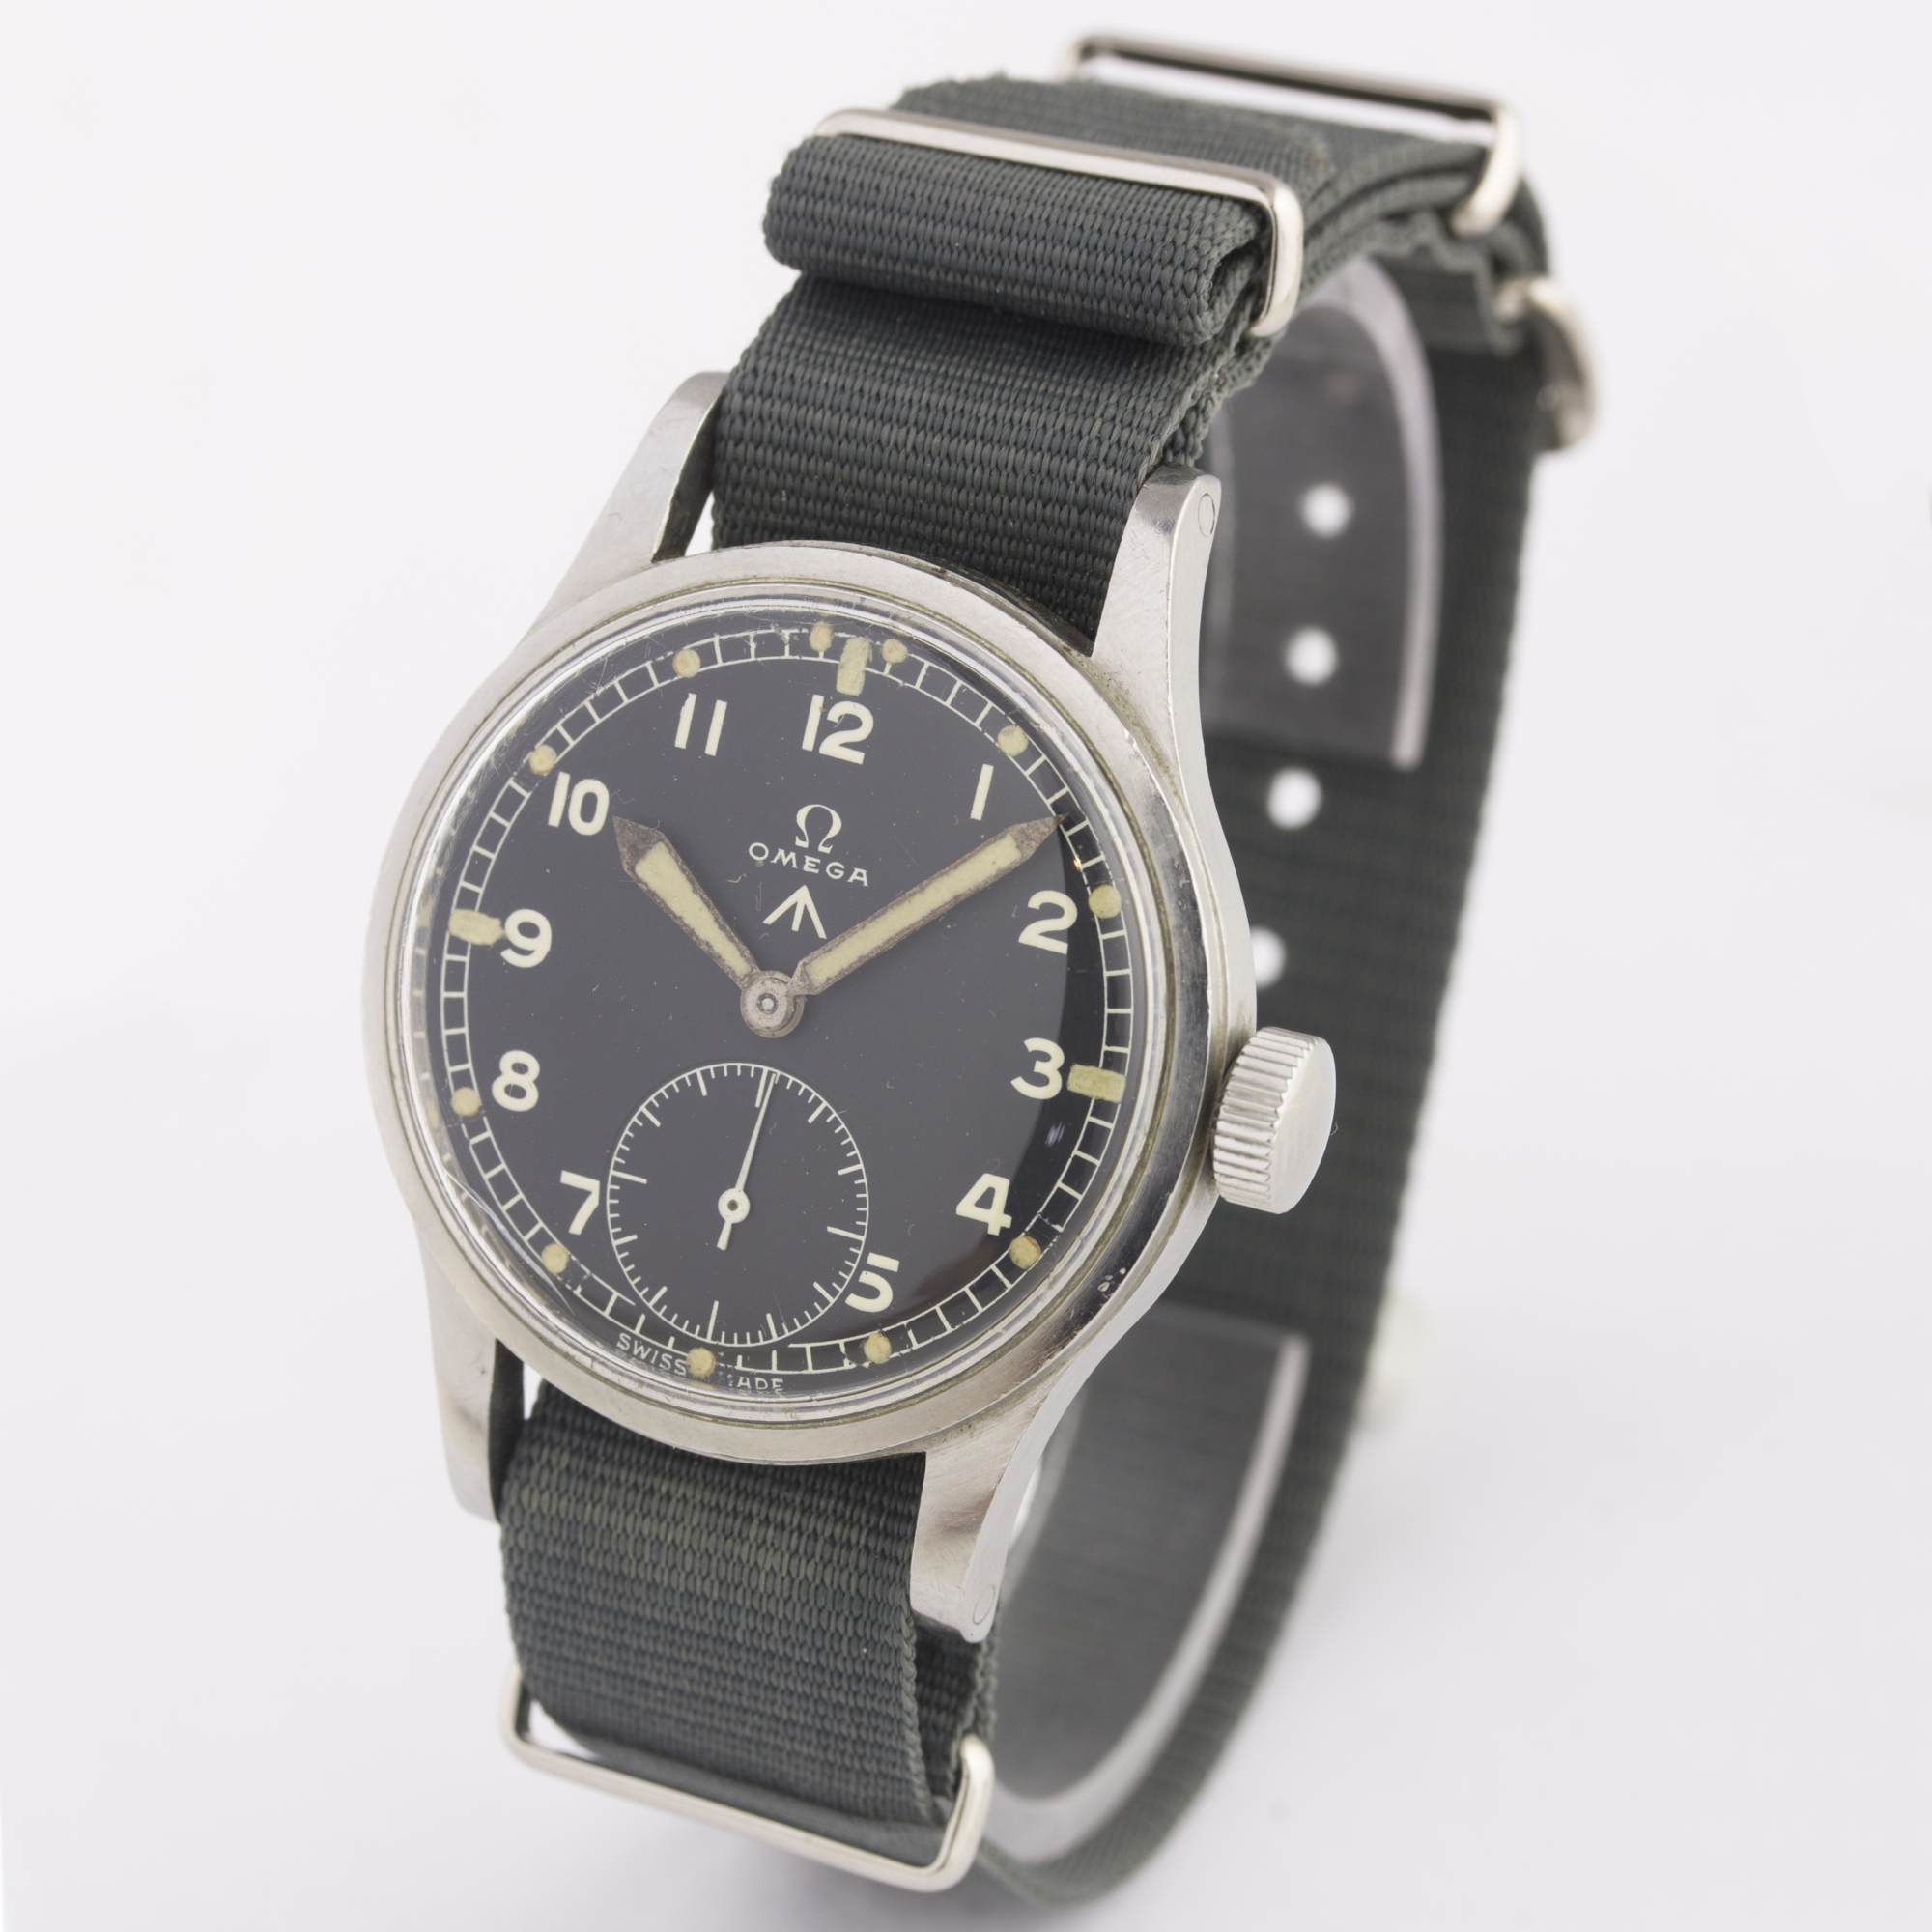 A GENTLEMAN'S STAINLESS STEEL BRITISH MILITARY OMEGA W.W.W. WRIST WATCH CIRCA 1947, PART OF THE " - Image 4 of 8